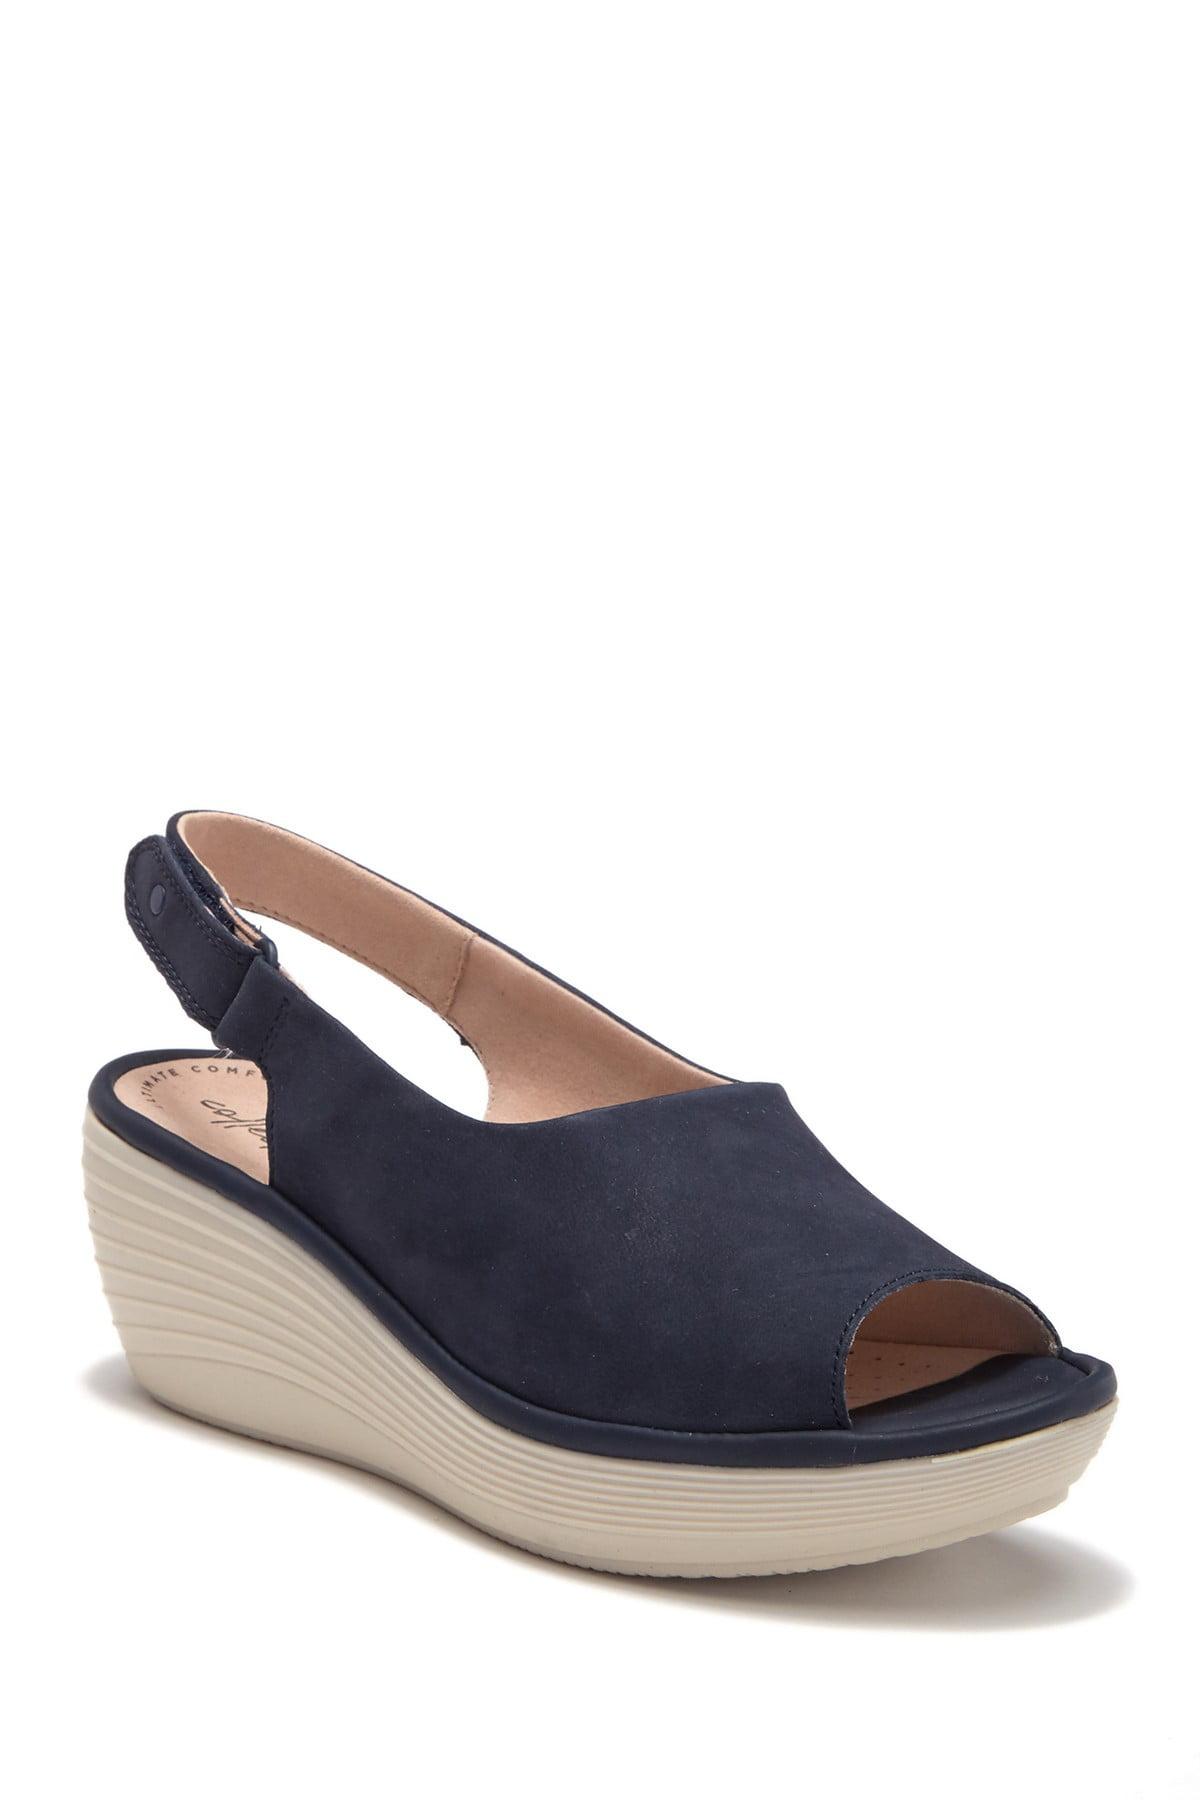 Clarks Reedly Shaina Wedge Sandal in Blue | Lyst